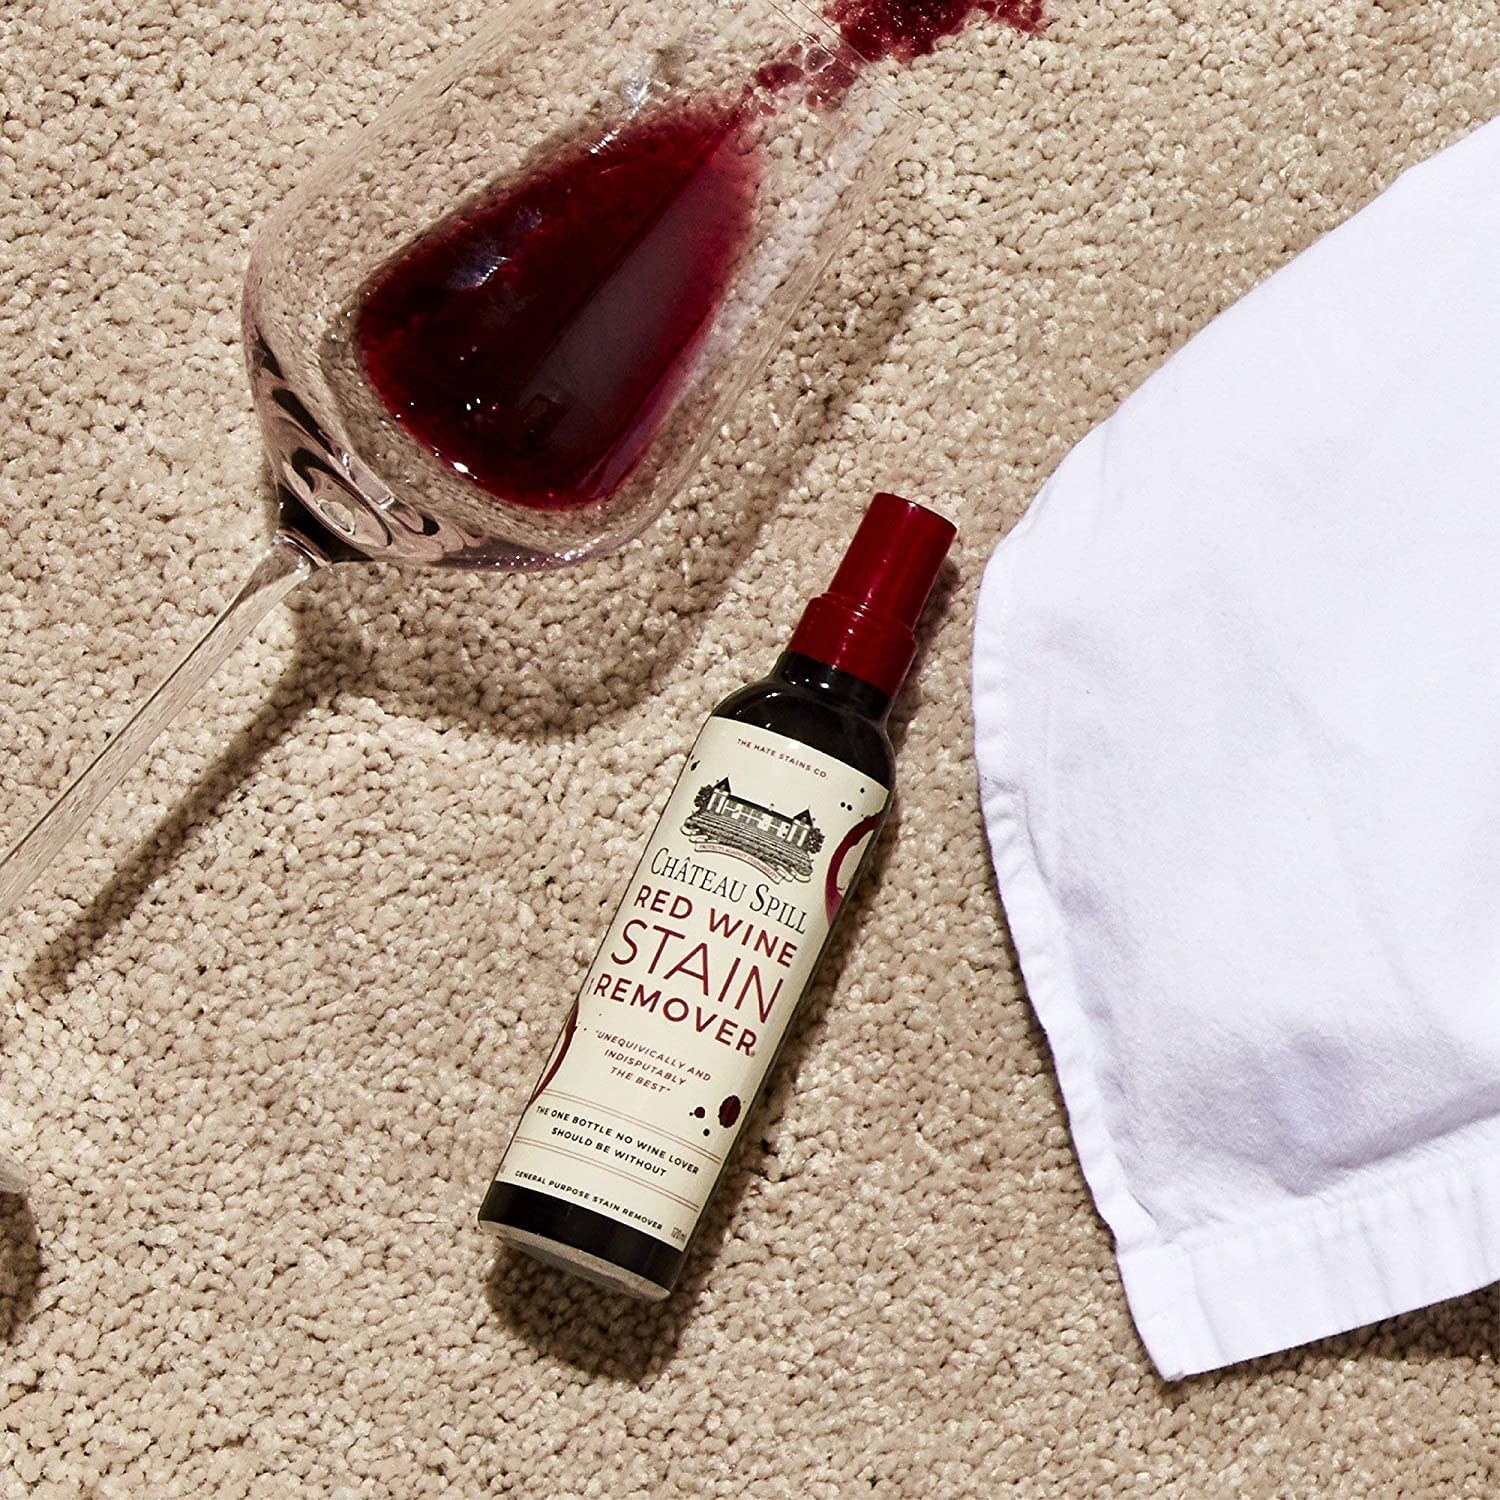 A bottle of the wine stain remover next to a spilt glass of red wine